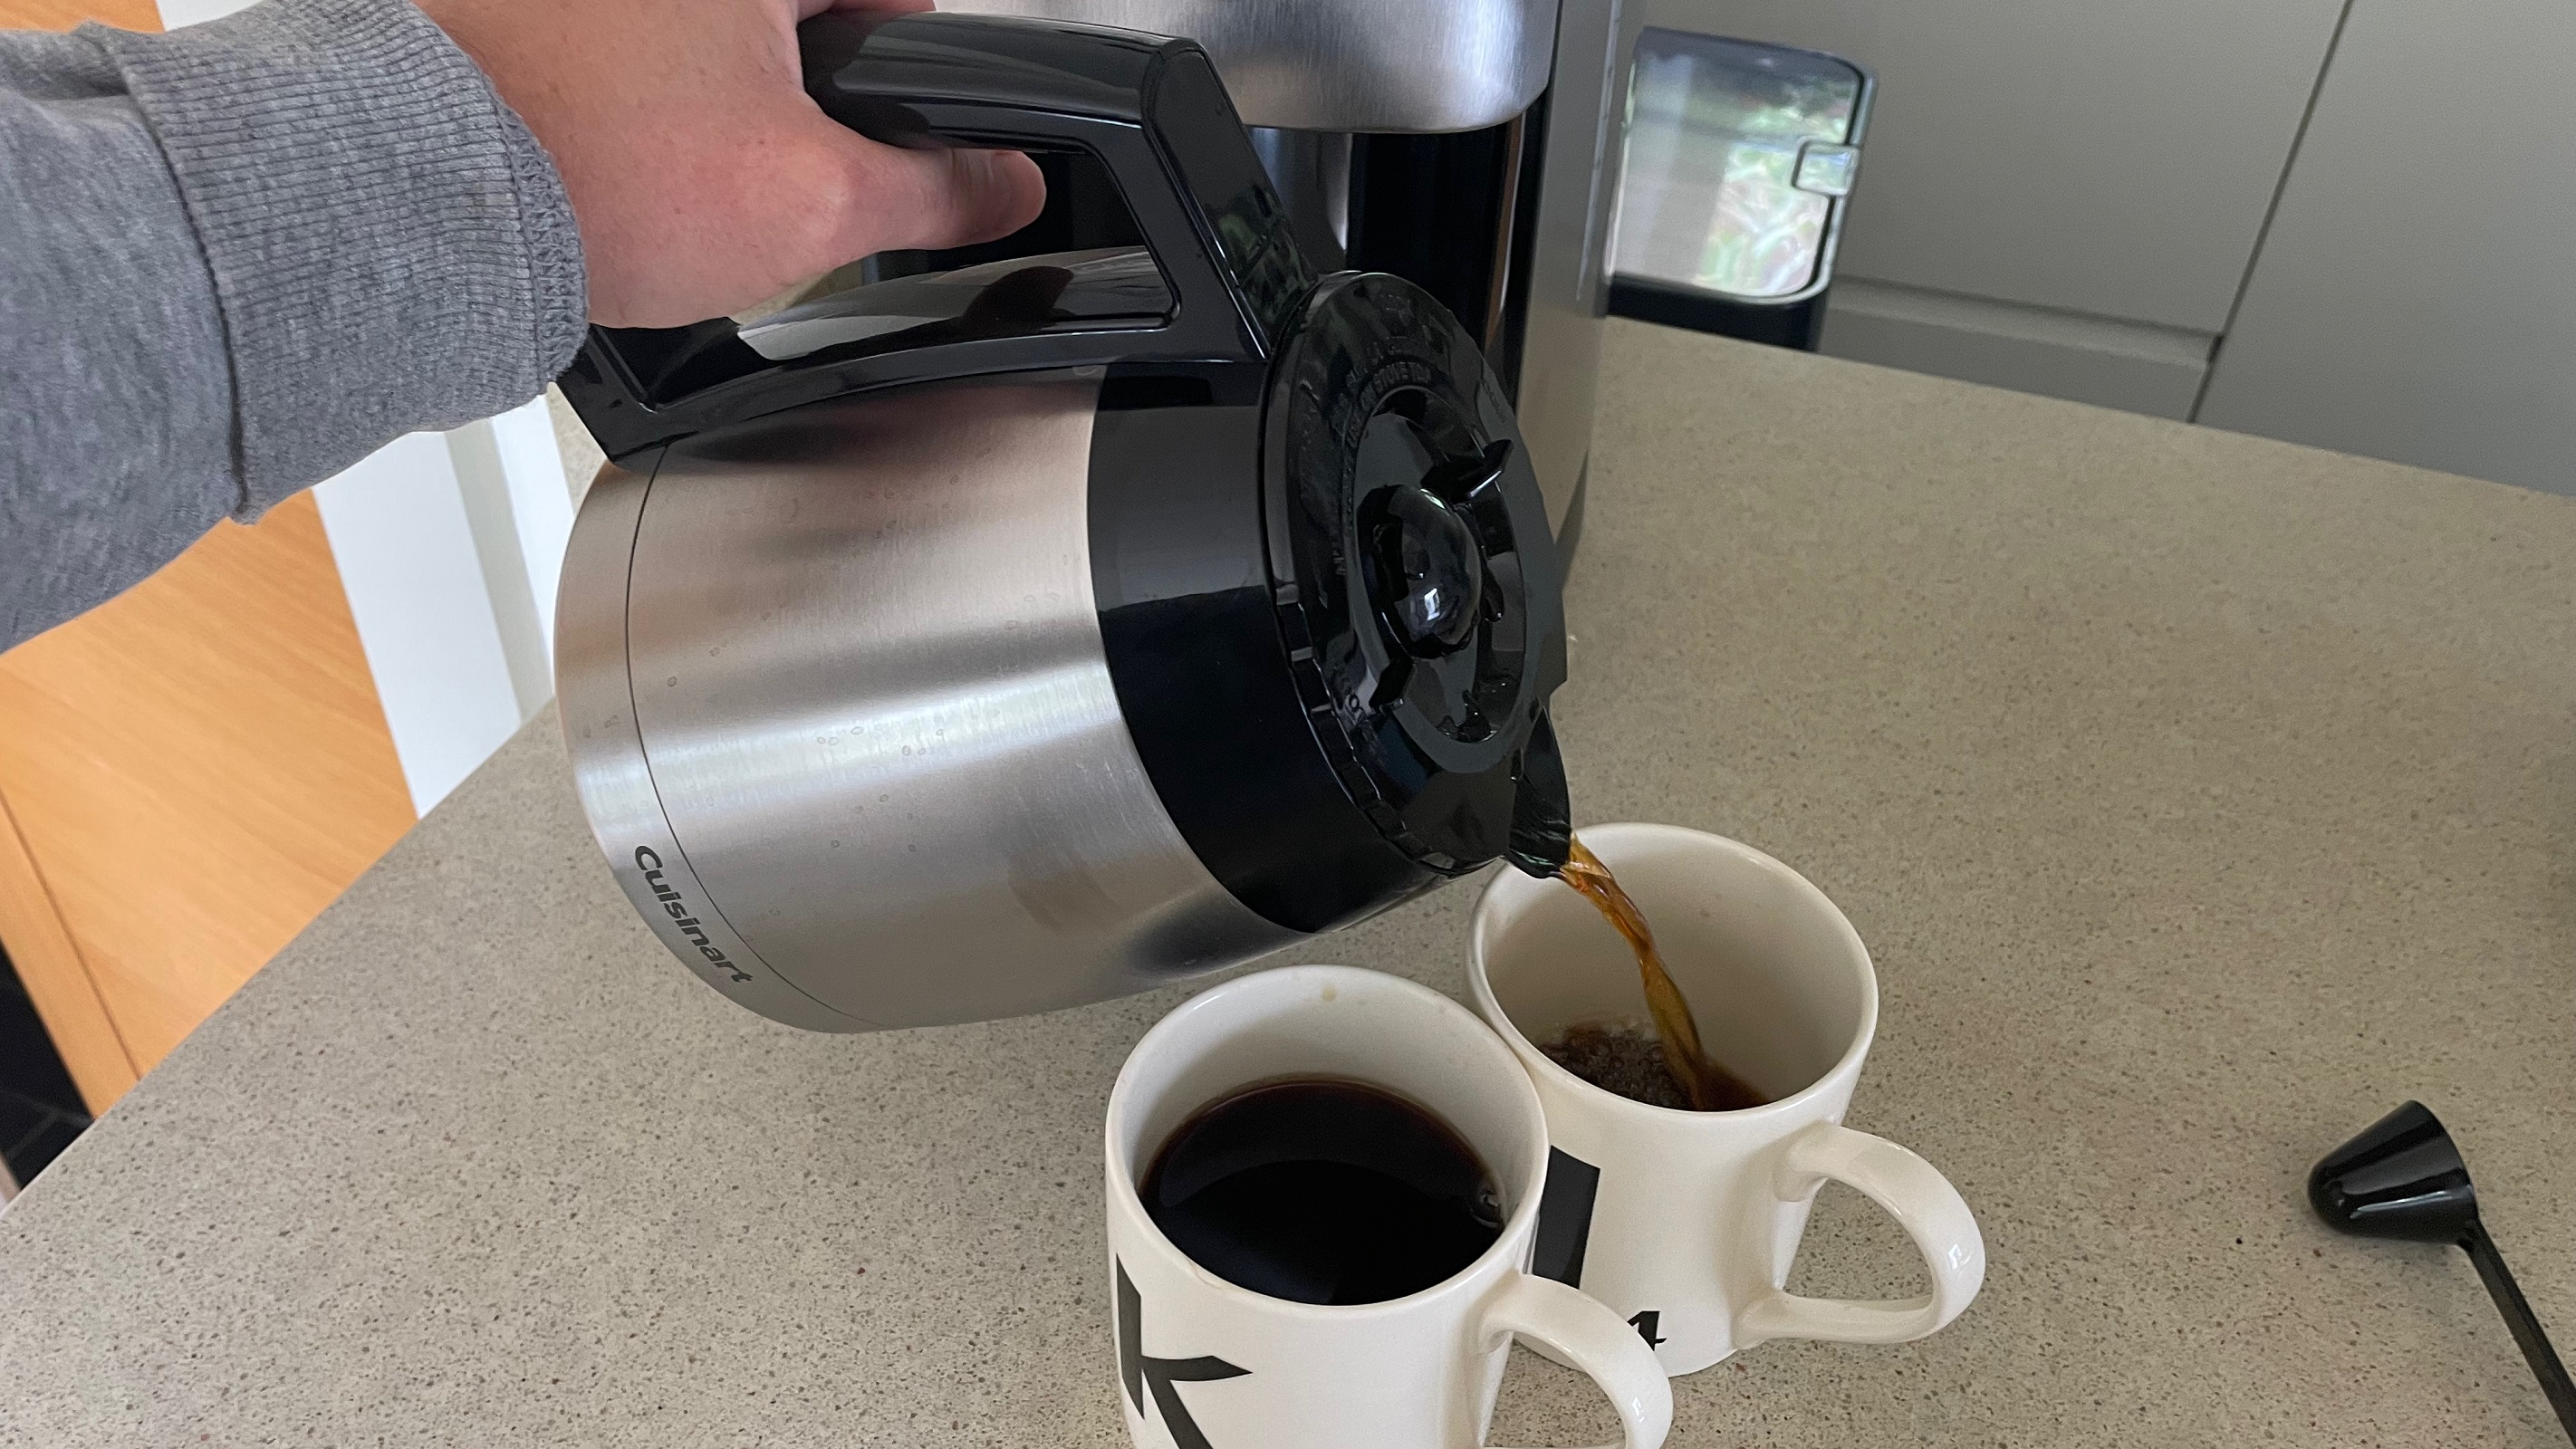 Pour the carefree coffee that comes with Cuisinart Grind & Brew